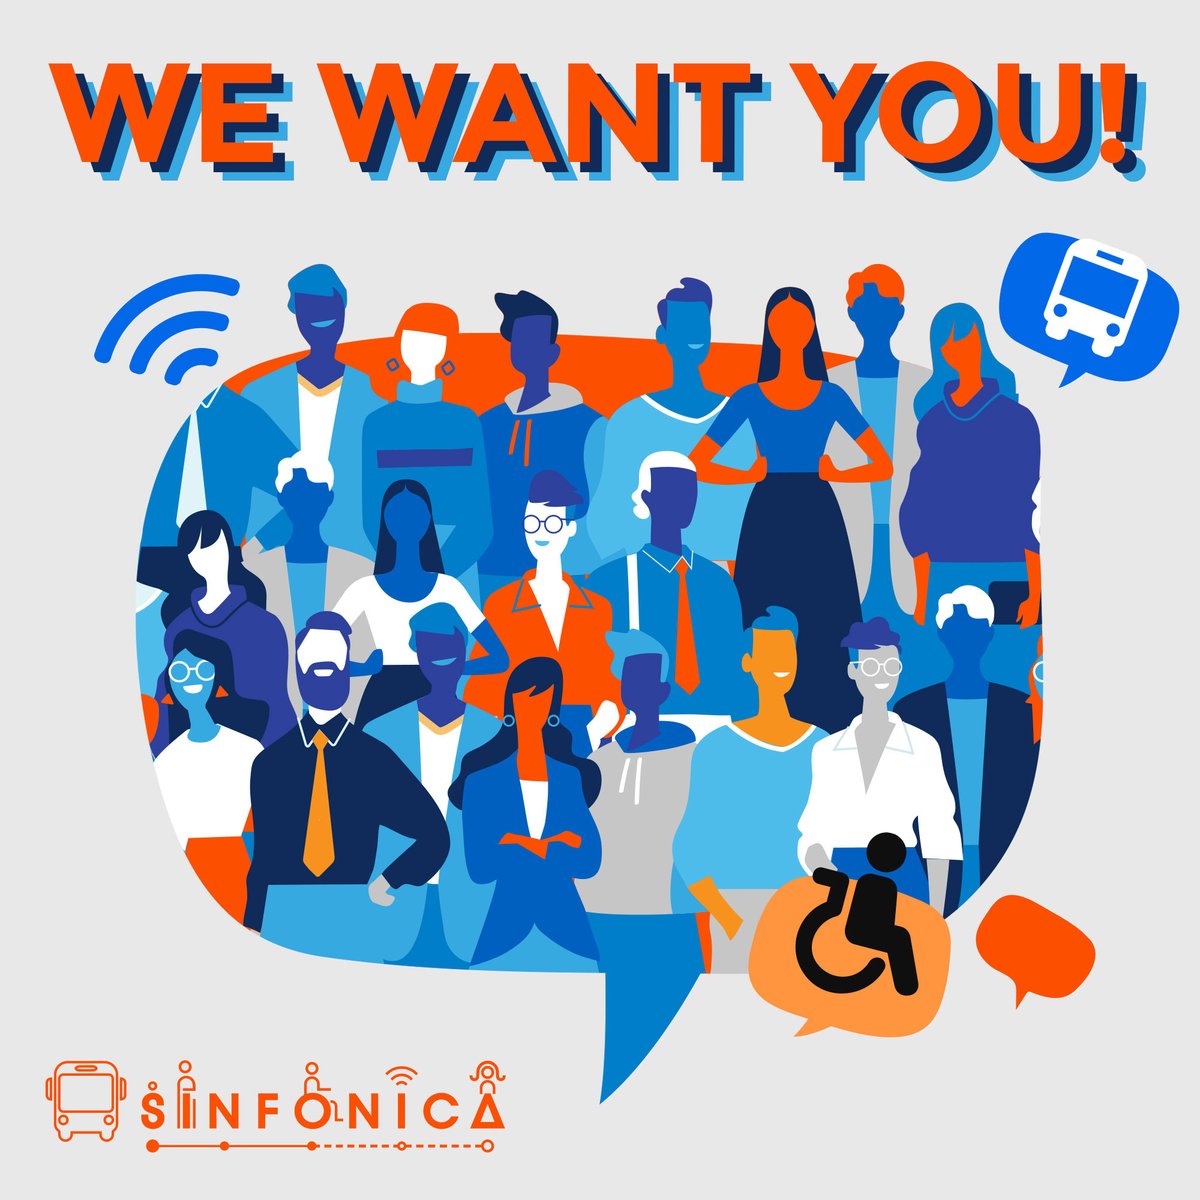 Take an active part in #SINFONICA! 📣​ ​ we have prepared an ONLINE SURVEY available in 8 languages to give everyone the chance to contribute to research on #CCAM. The survey is accessible at this link: tud.link/491m33 ​ Help us to foster the #mobility of the future!